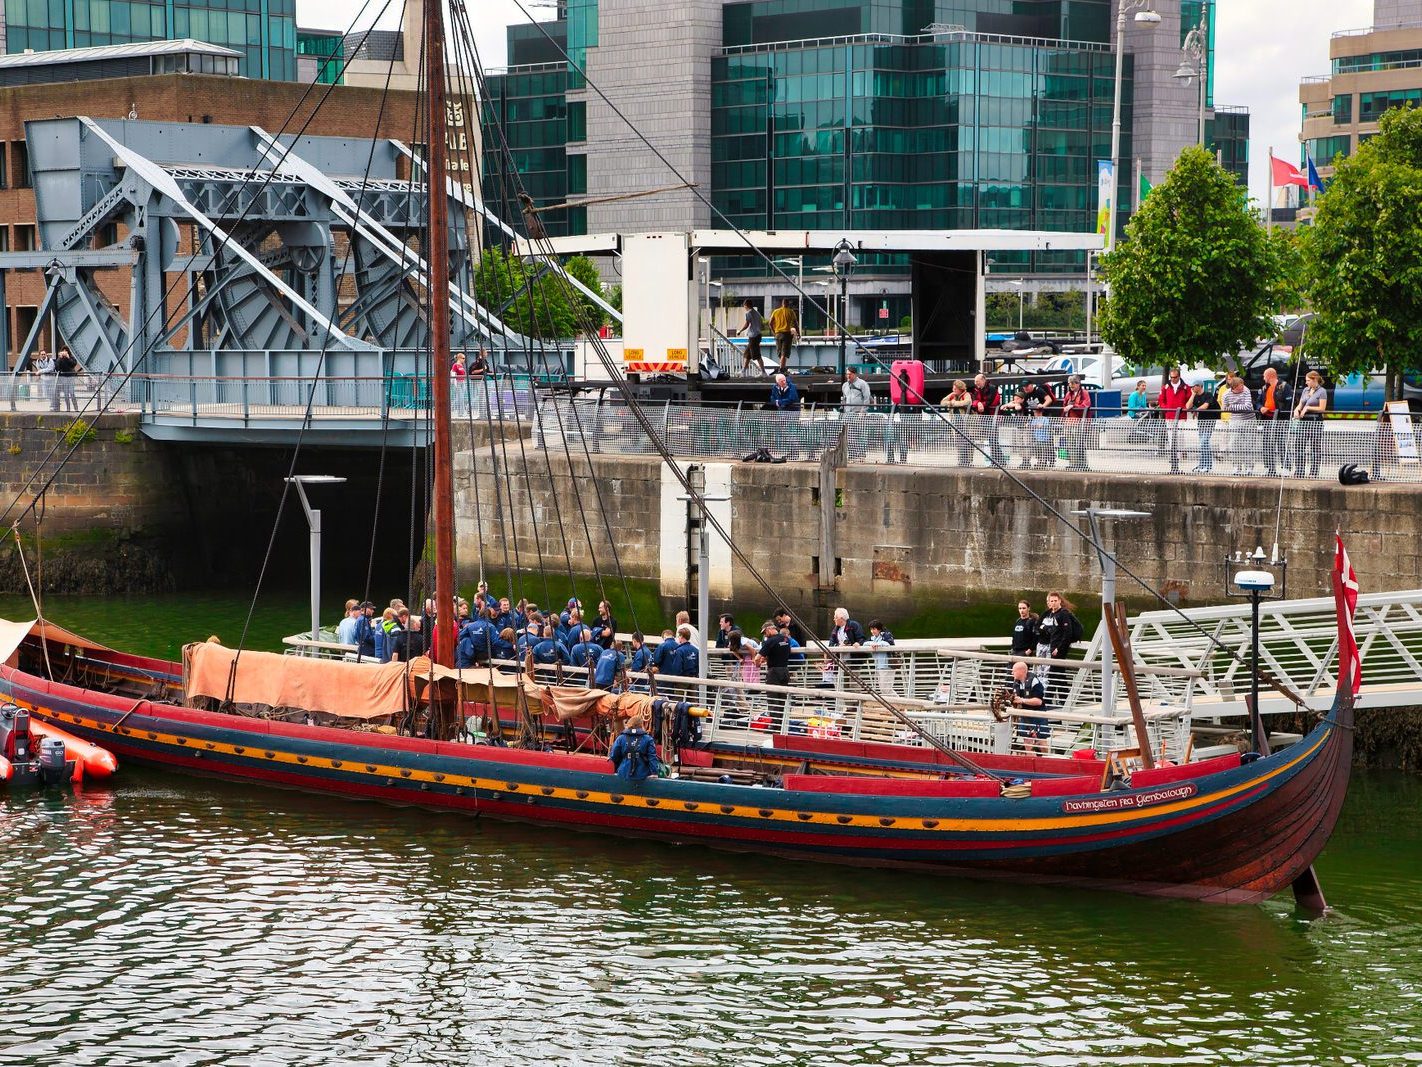 THE SEA STALLION FROM GLEANDALOUGH WAS LIFTED INTO THE LIFFEY USING A LARGE CRANE 006